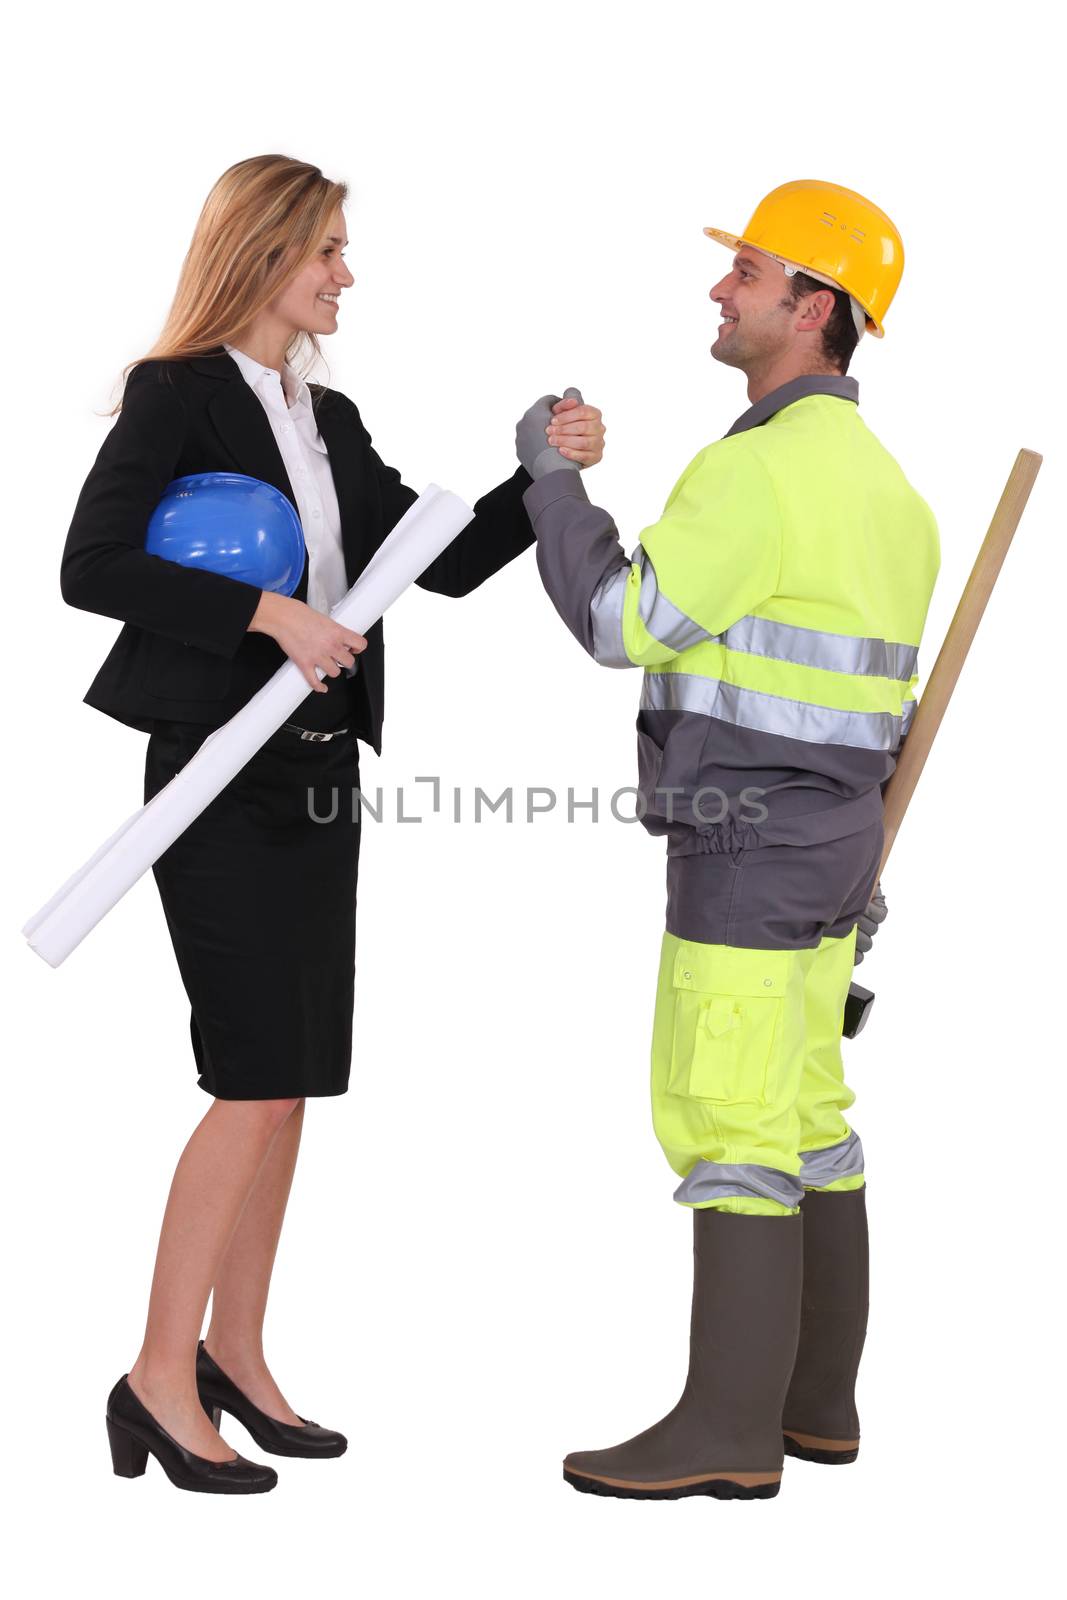 Project workers greeting each other